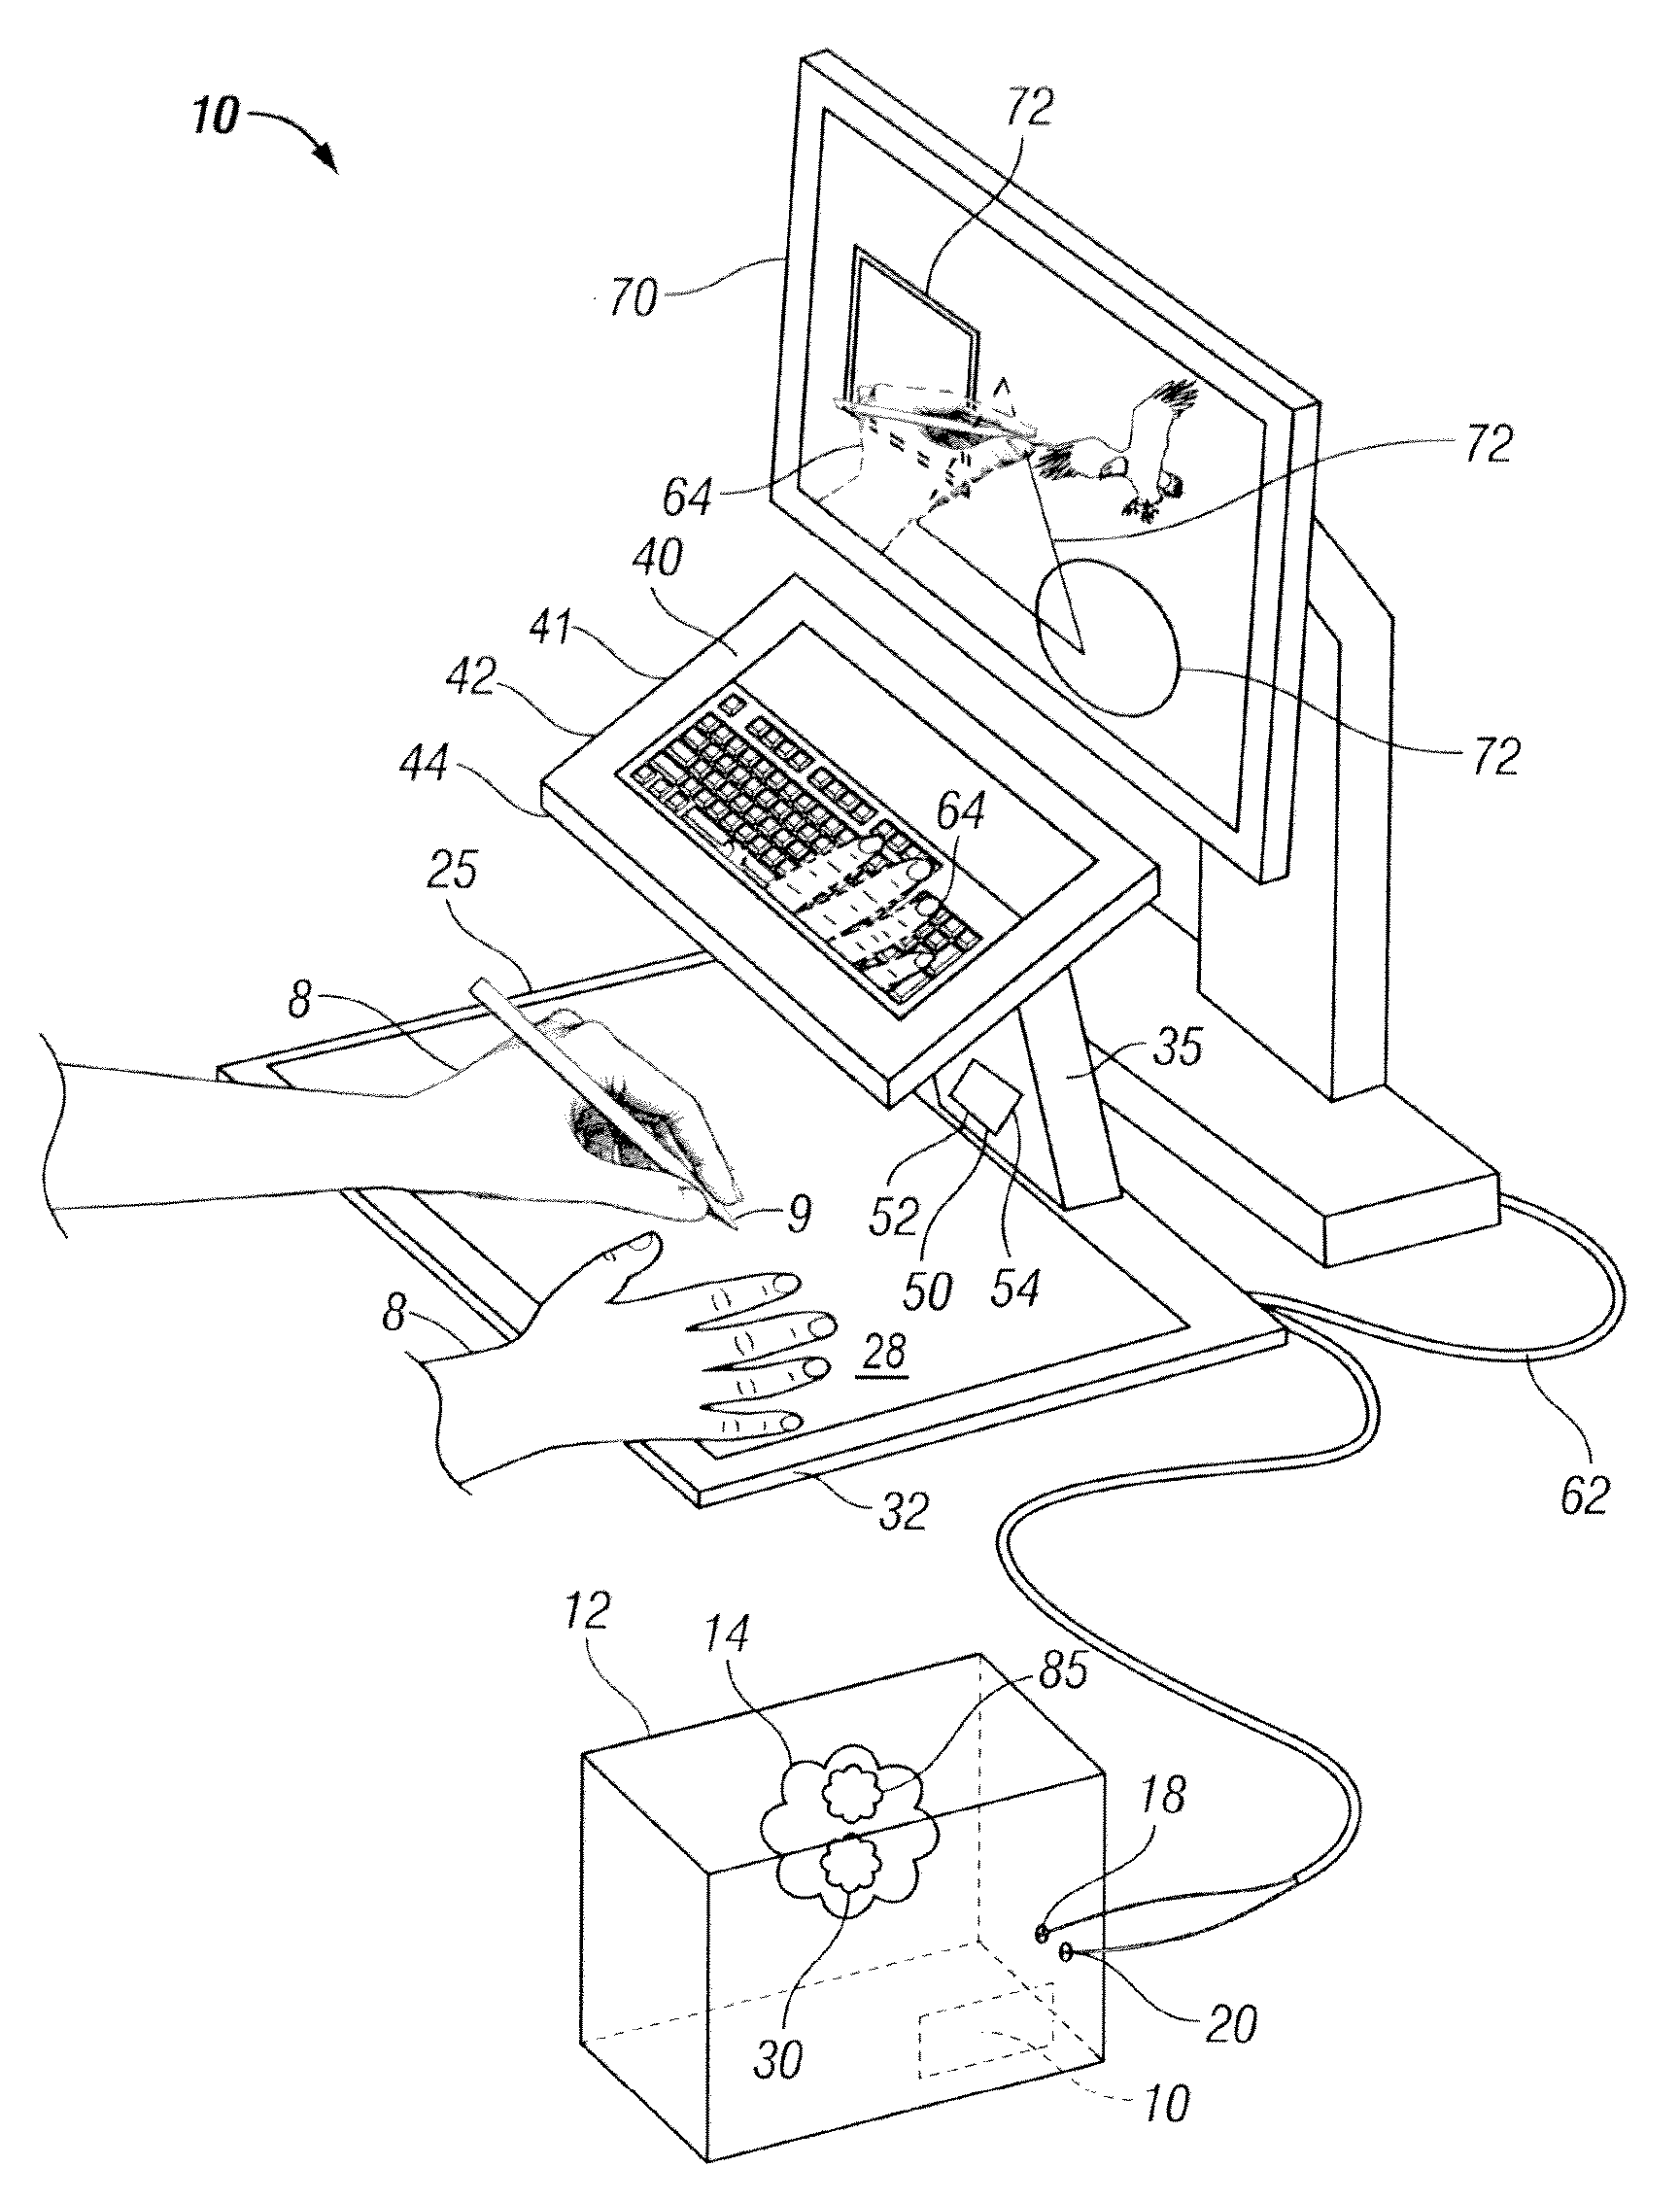 Input cueing emmersion system and method